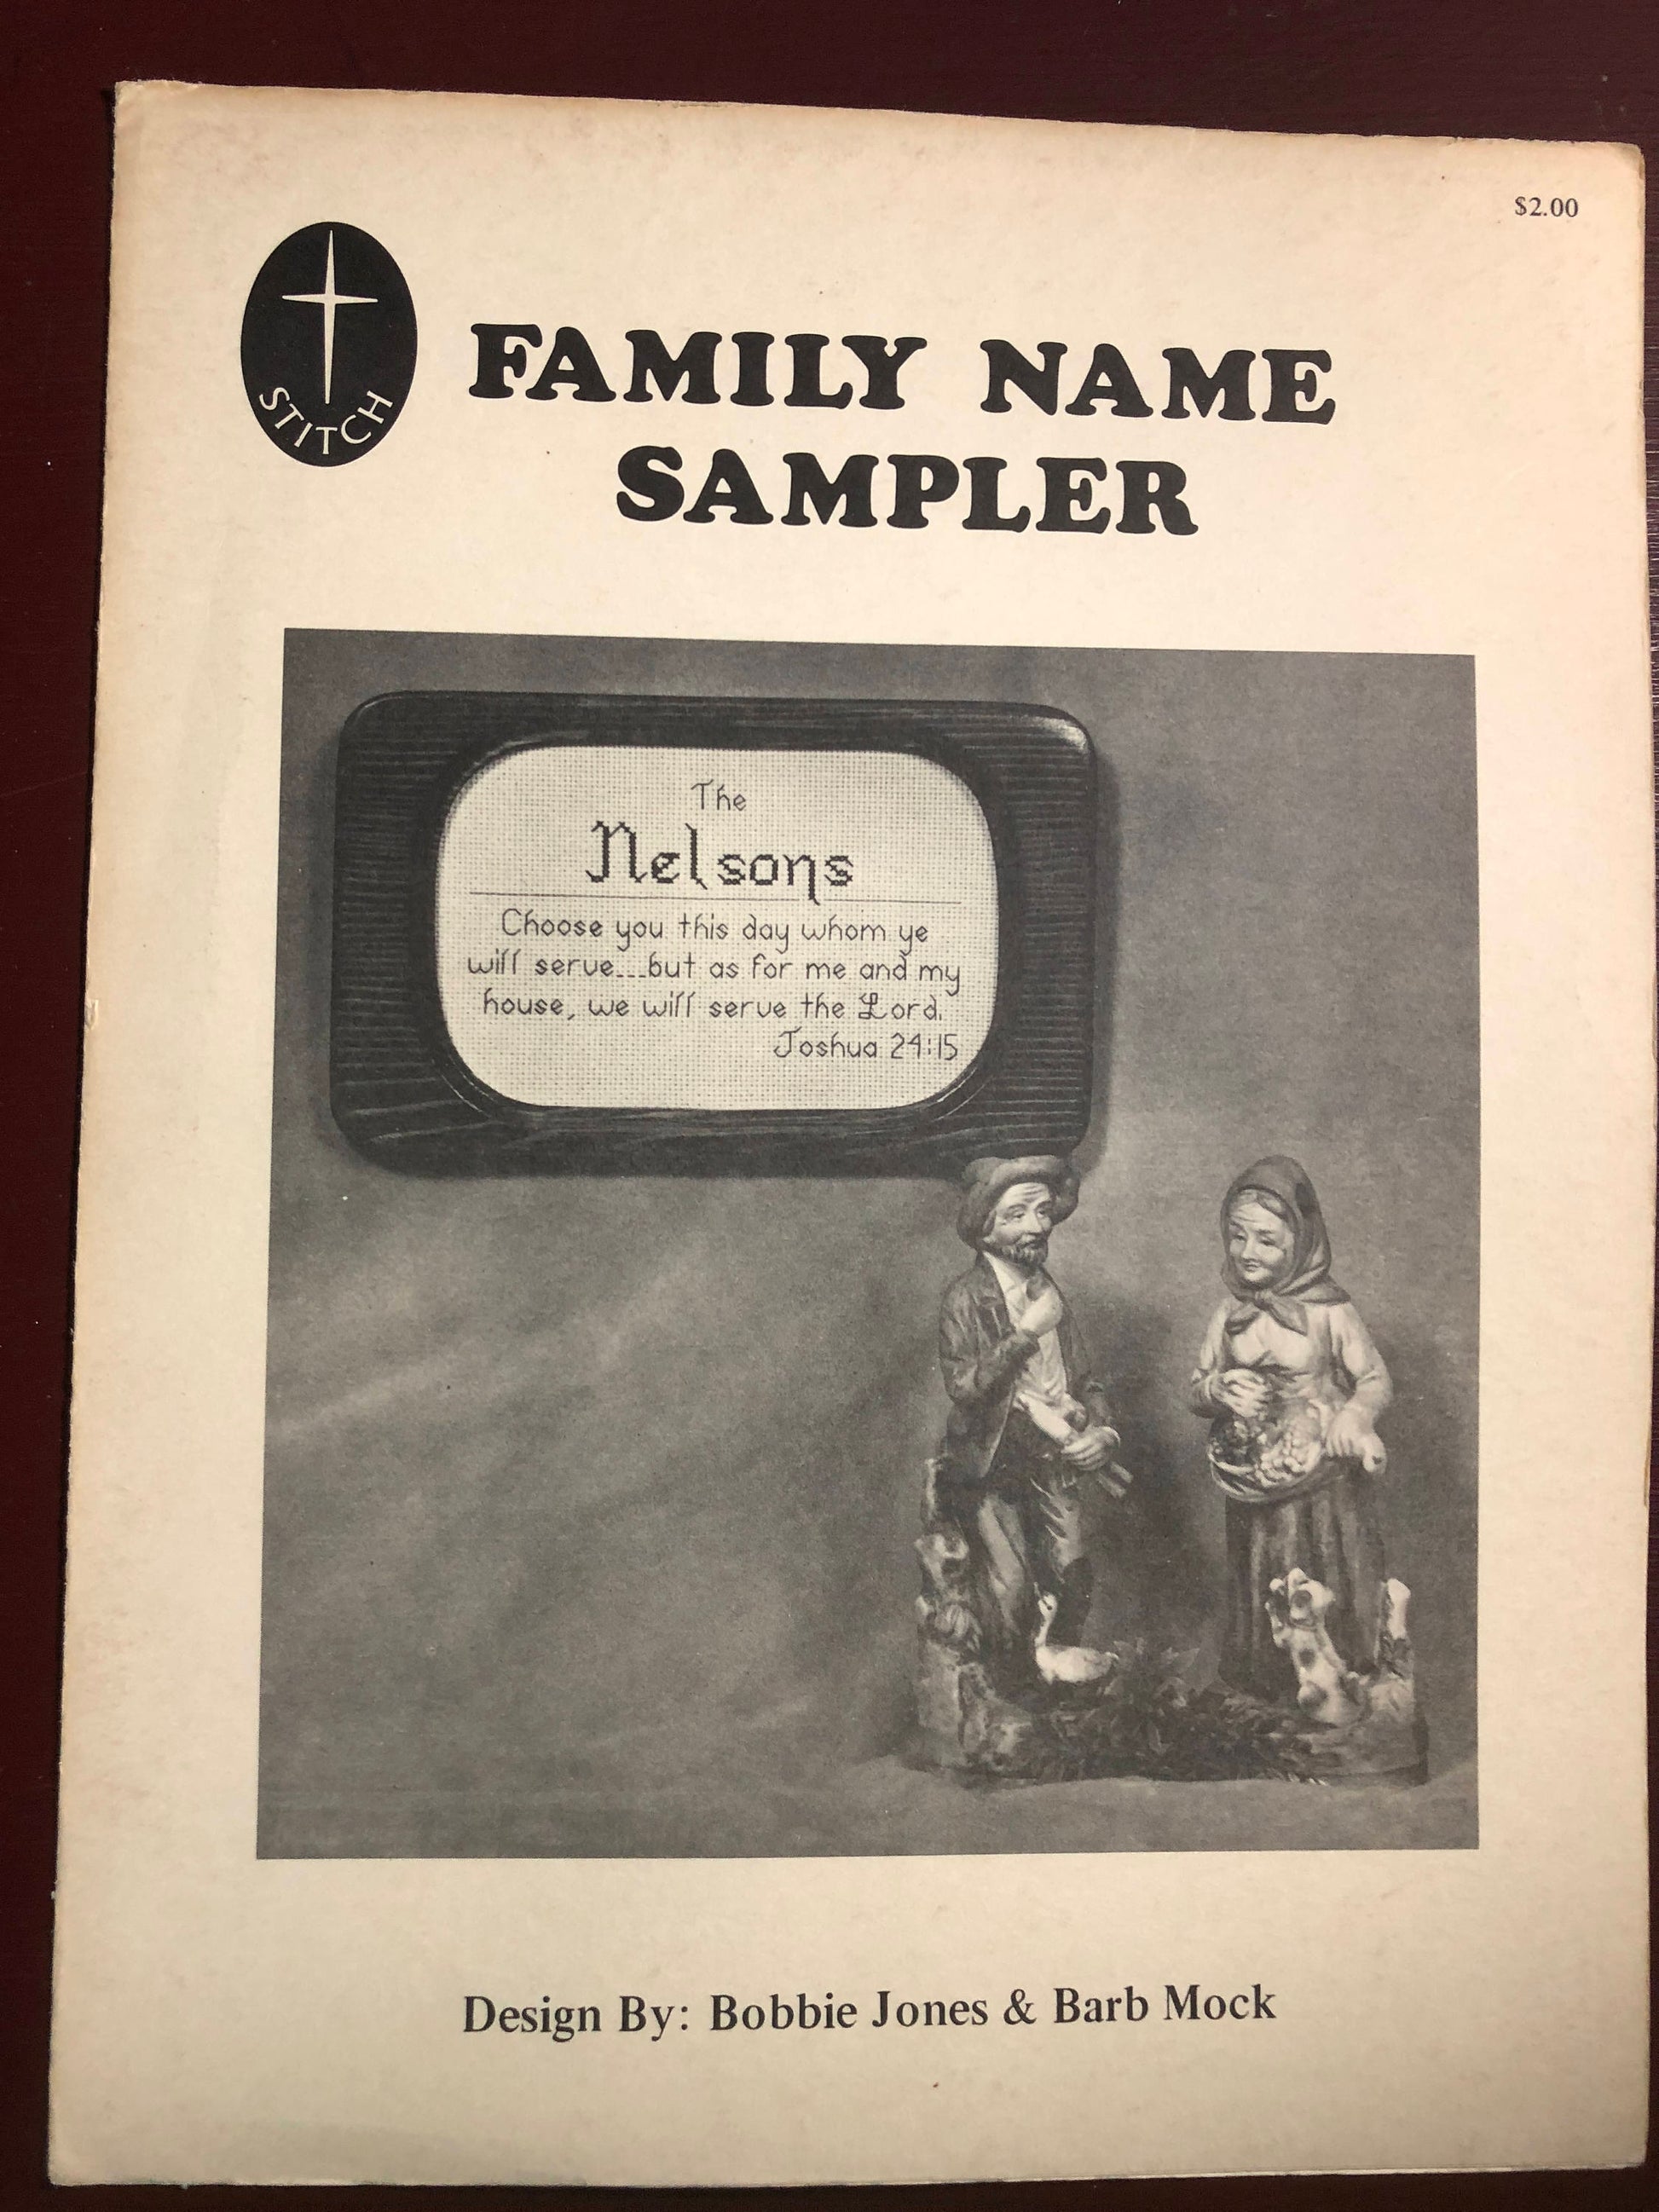 Family Name Sampler, Counted Blessings, Design by,  Bobbie Jones and Barb Mock, Vintage ,1982, counted cross stitch pattern